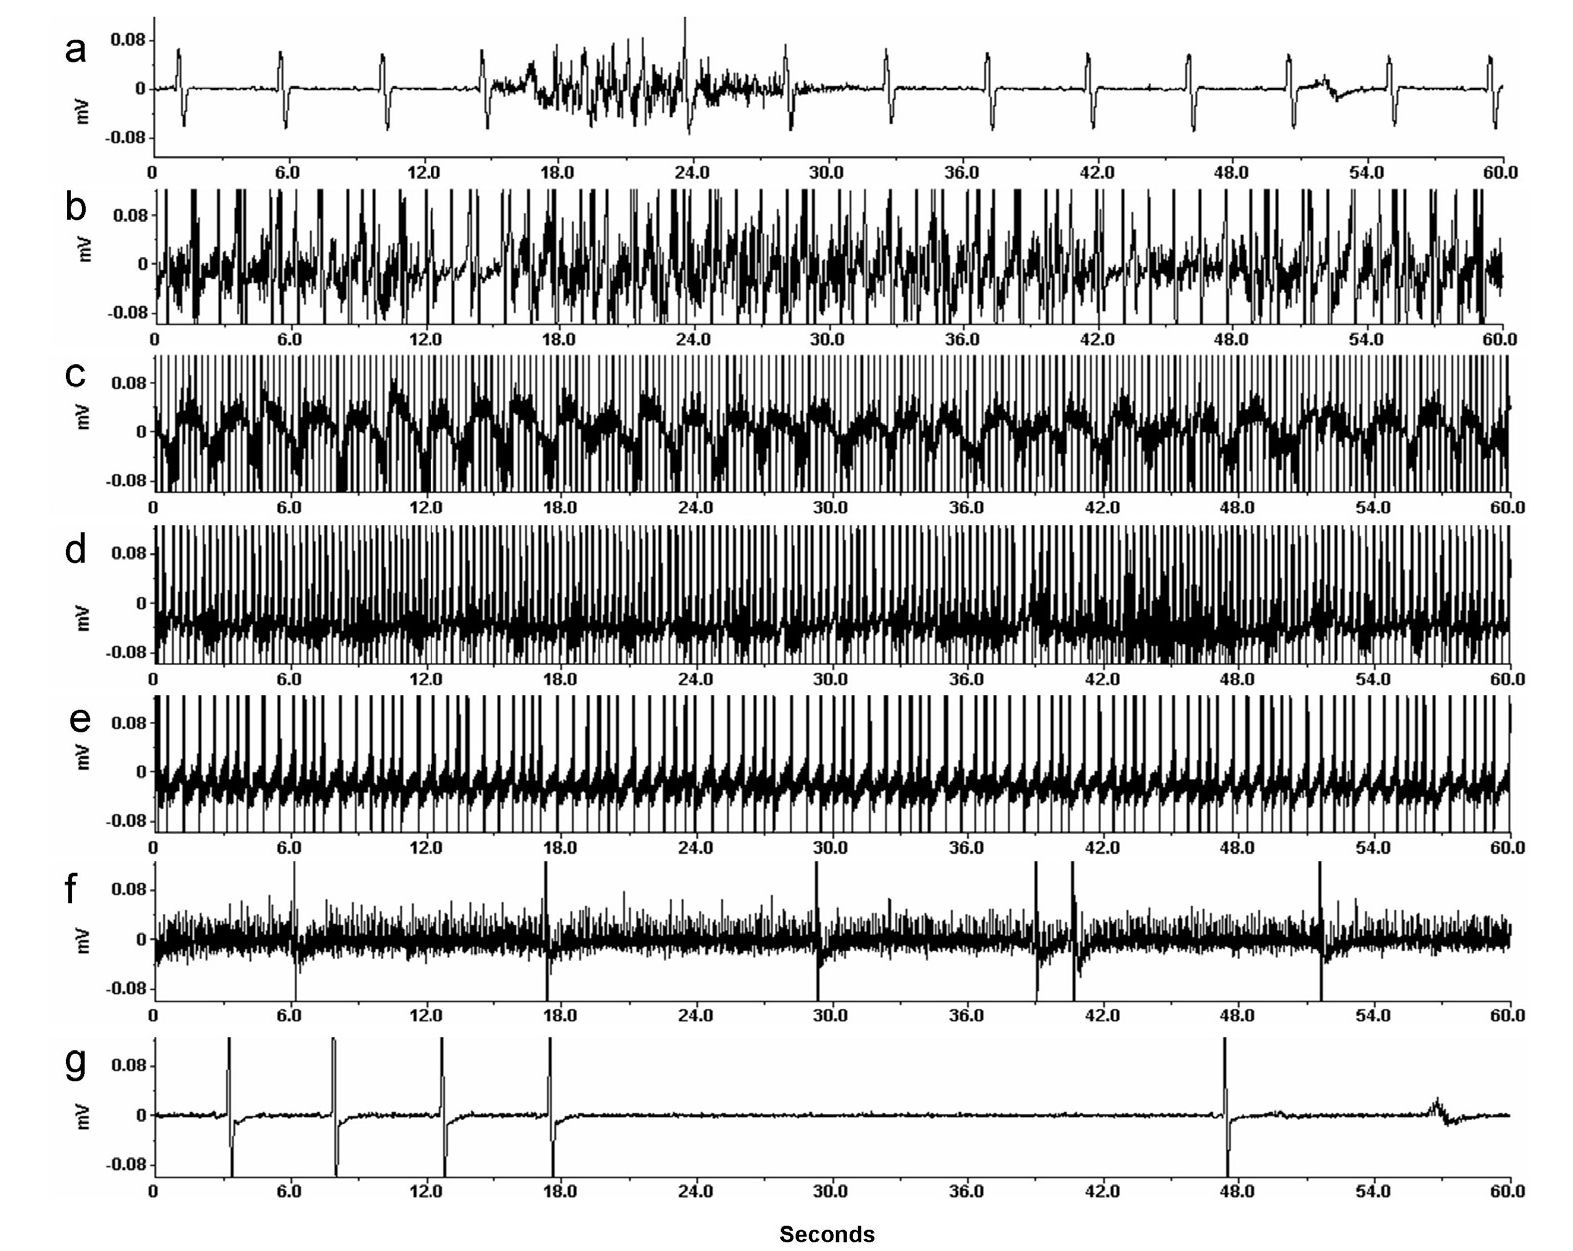 Electrocardiogram of an arctic ground squirrel at different core body temperatures during different phases of hibernation. 